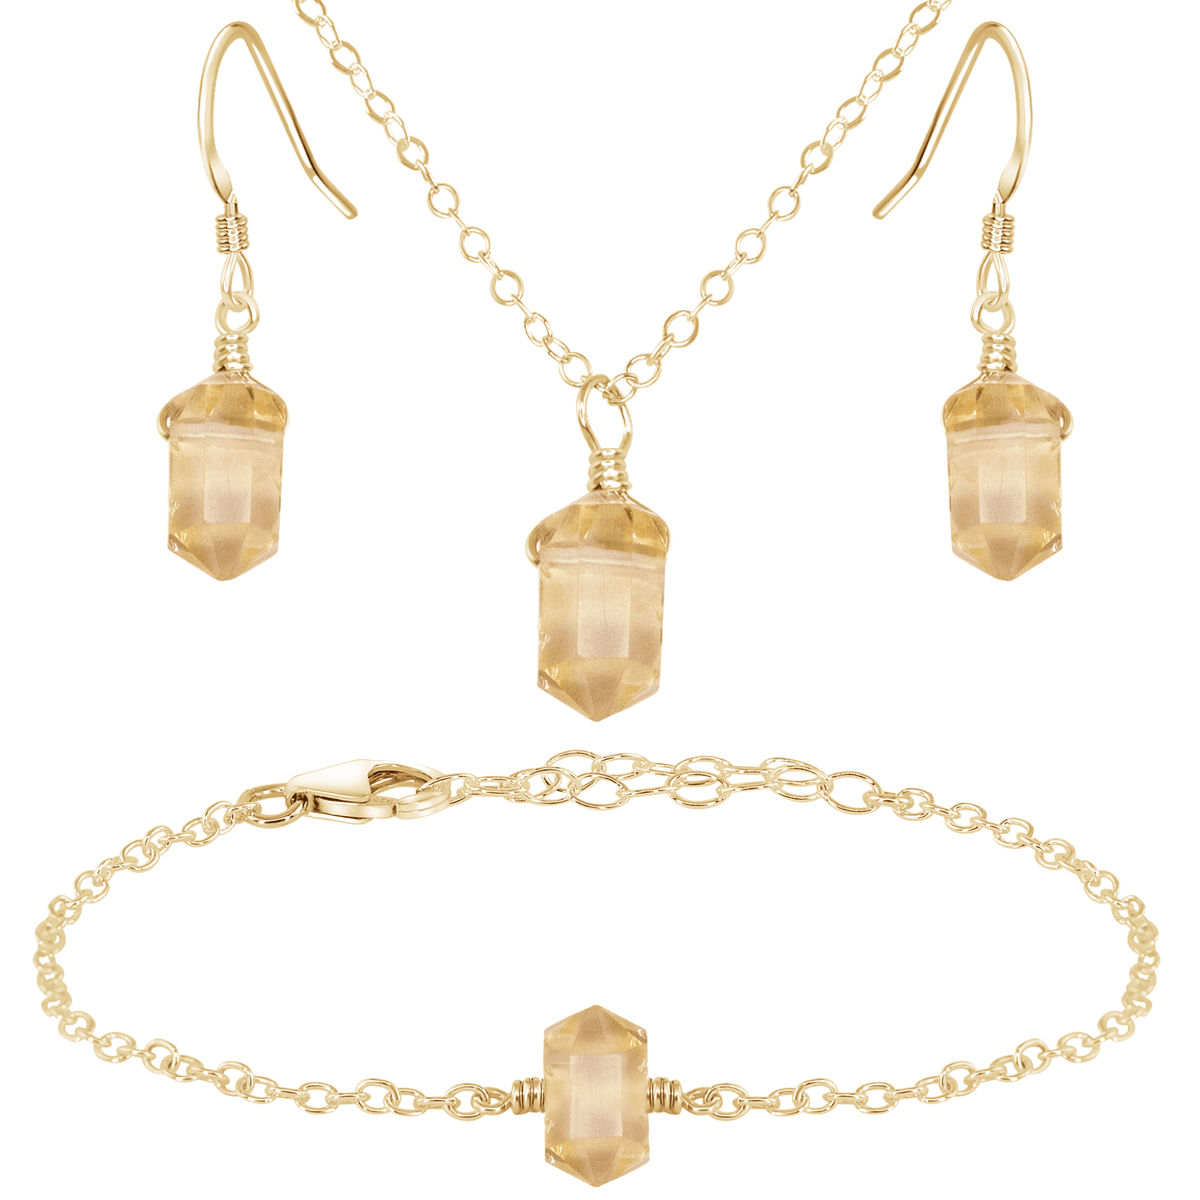 Citrine Double Terminated Crystal Earrings, Necklace & Bracelet Set